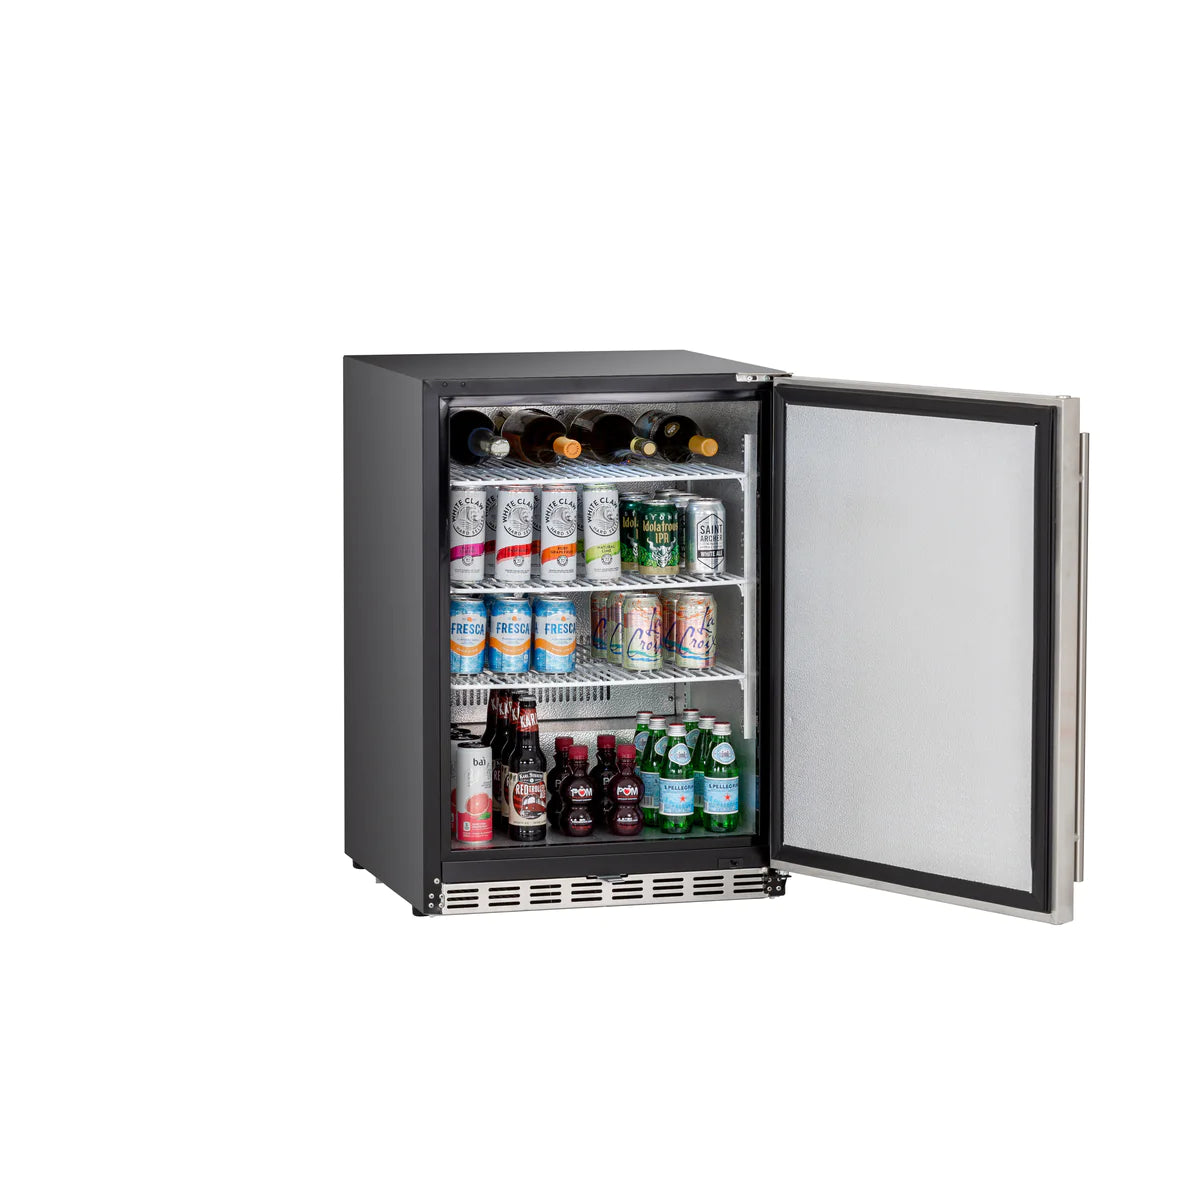 Outdoor Rated Refrigerator - 24" 5.3c